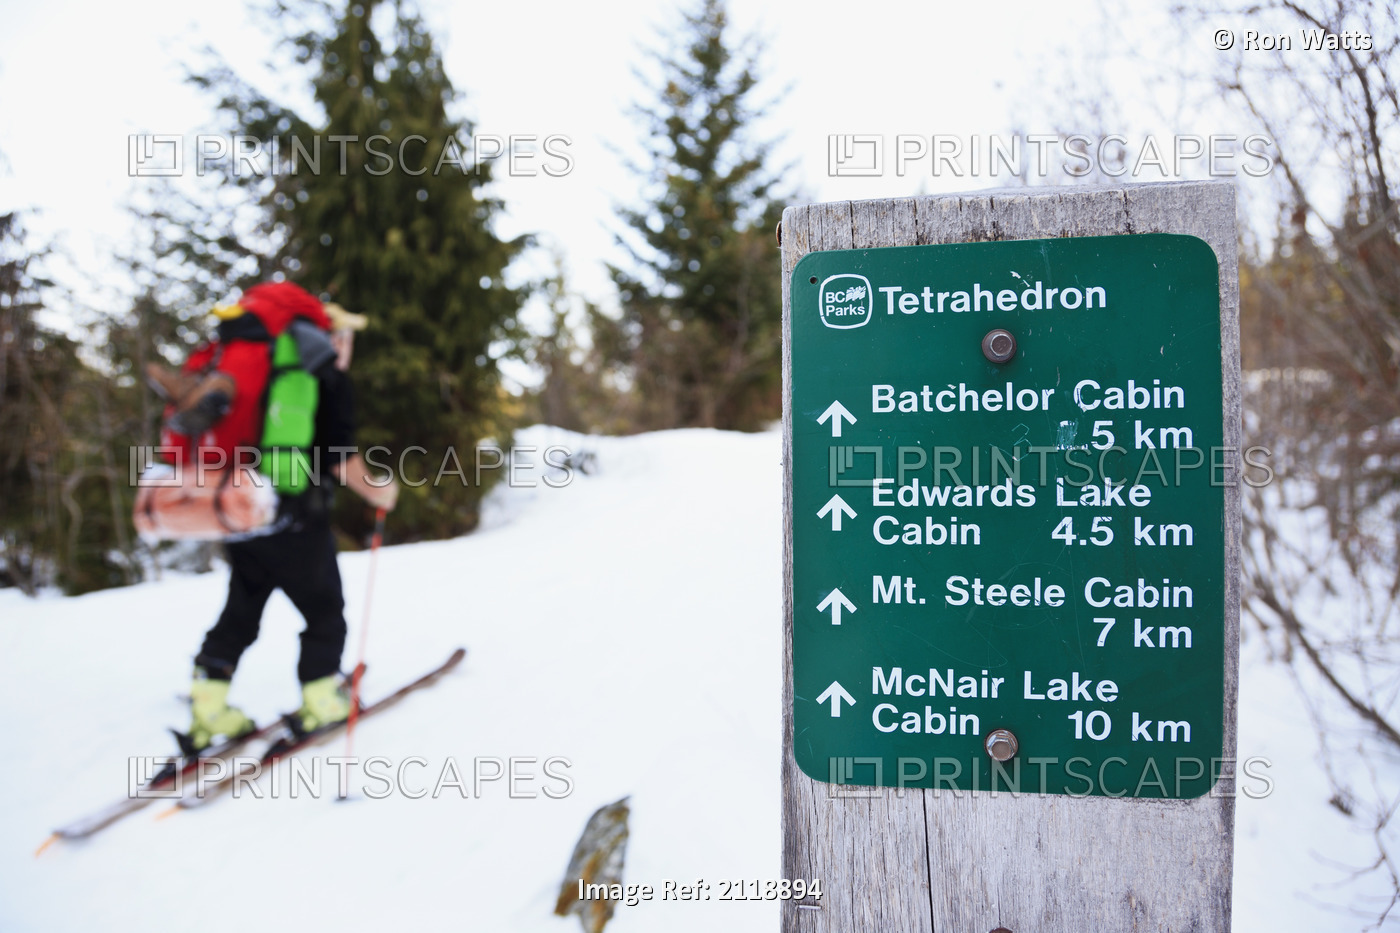 A Skier Ascending The Trail Enroute To Mount Steele Cabin In Tetrahedron ...